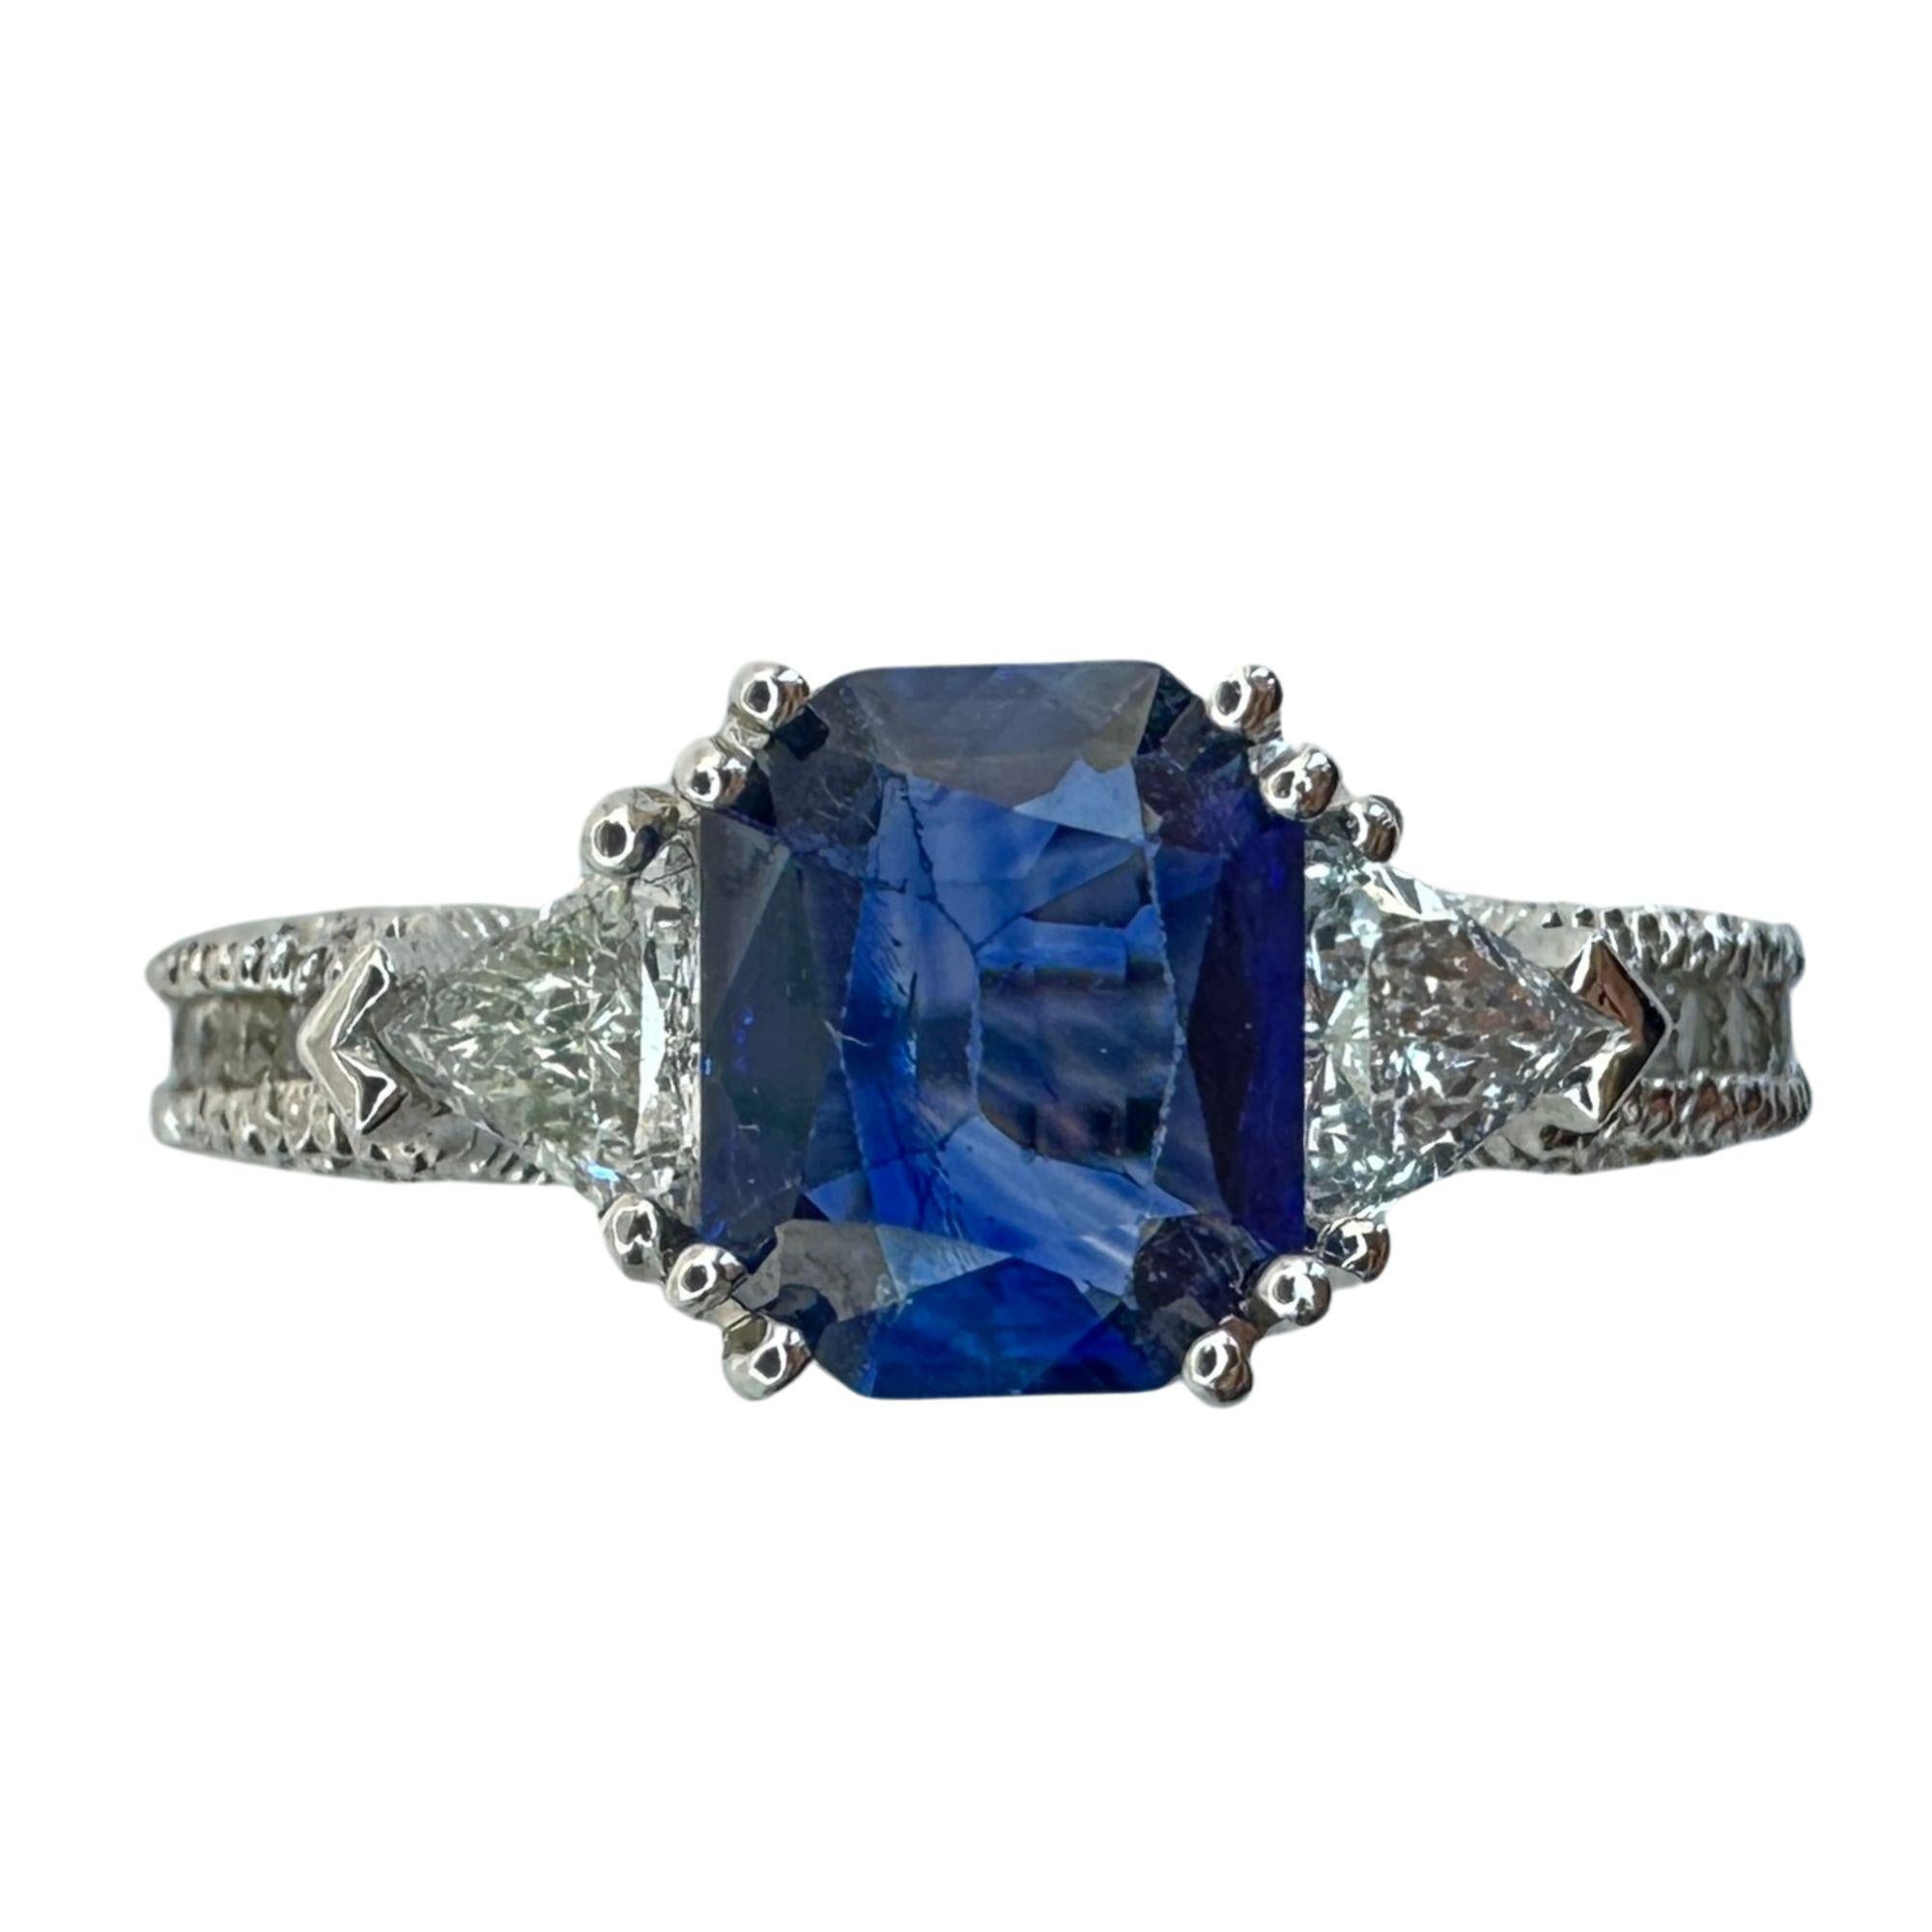 Experience elegance and luxury with our 18k Diamond and Sapphire Ring. Featuring a brilliant 1.28 carat sapphire at its center, surrounded by sparkling 0.35 carat trillion cut and 0.53 carat round cut diamonds, this ring is truly a statement piece.